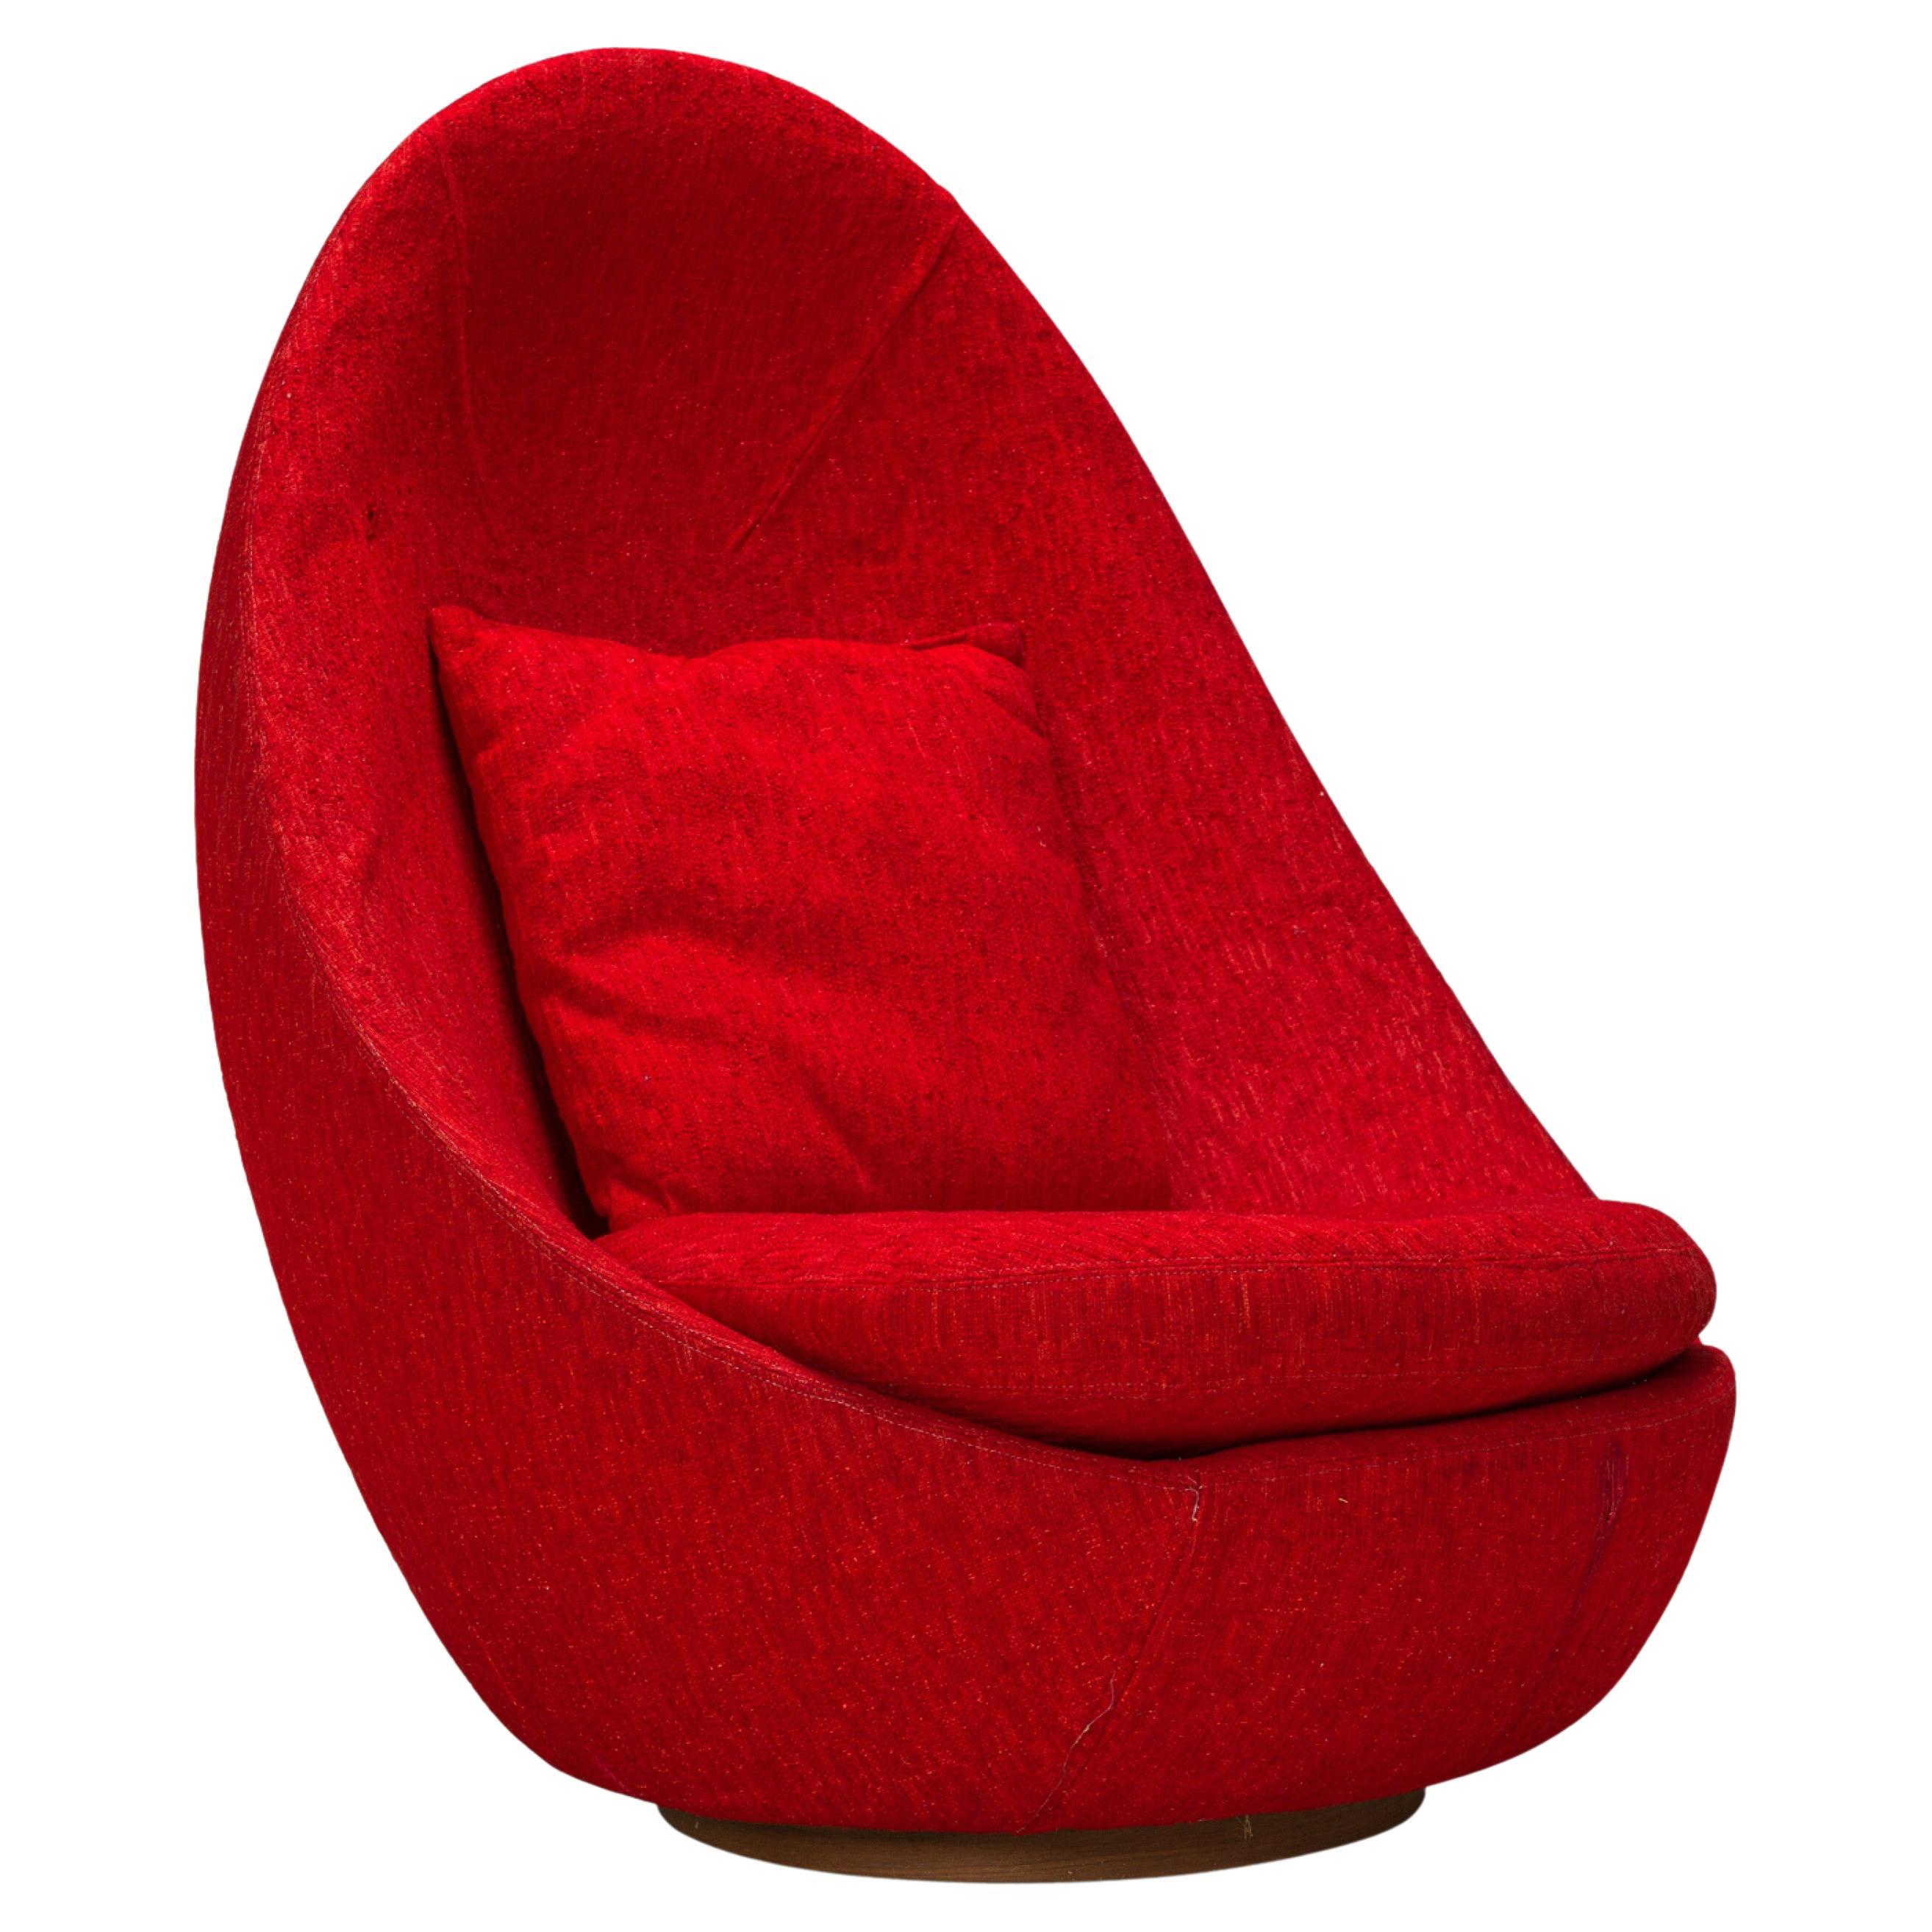 Milo Baughman American Mid-Century Red Textured Upholstered Swivel Egg Chair For Sale